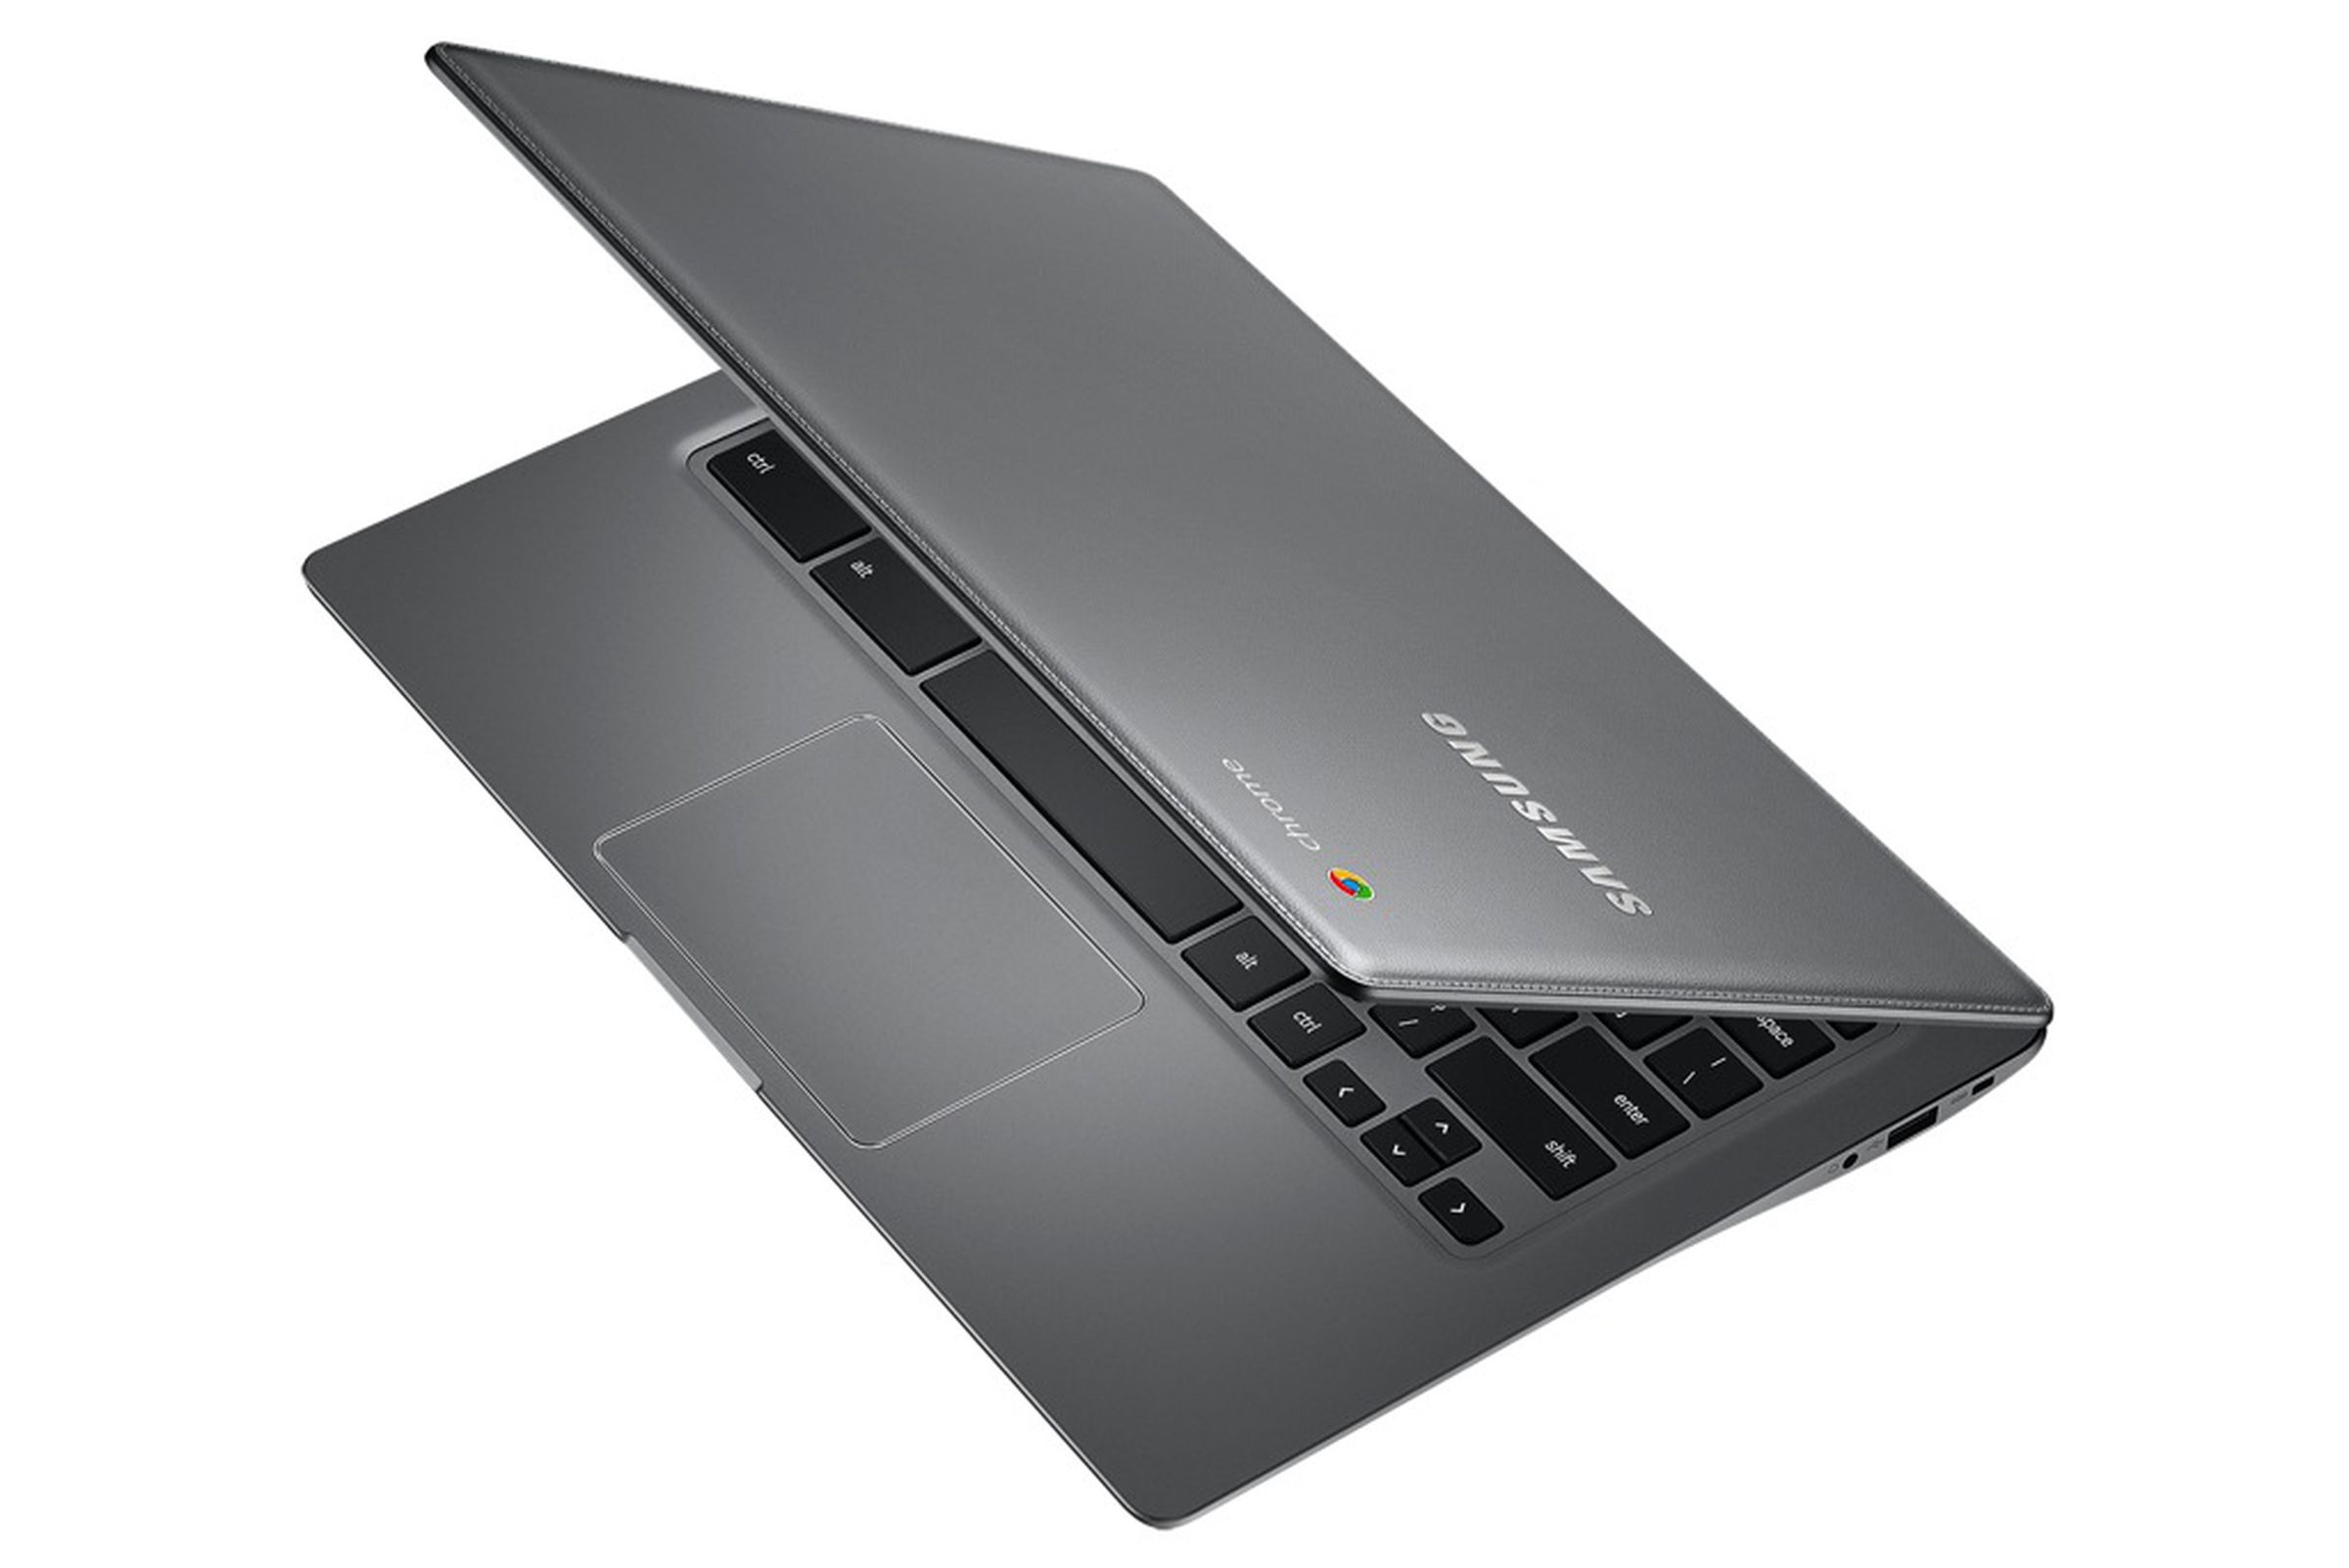 Samsung Chromebook 2 pictures